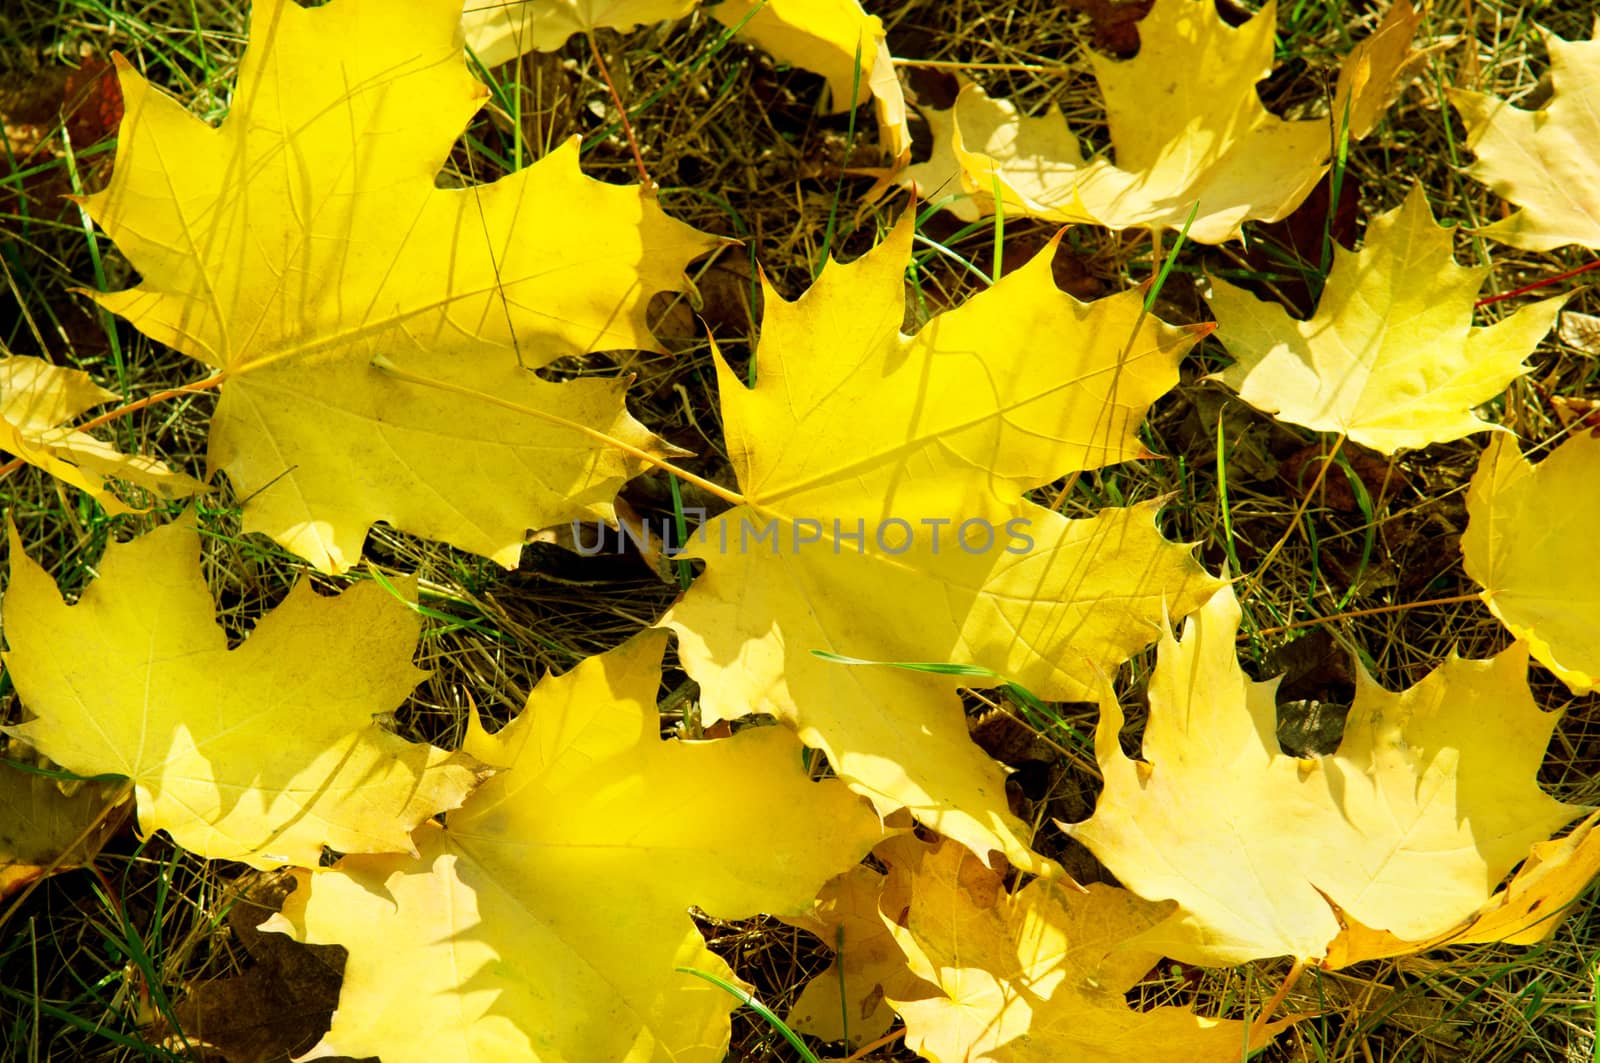 yellow maple leaves on green grass in autumn